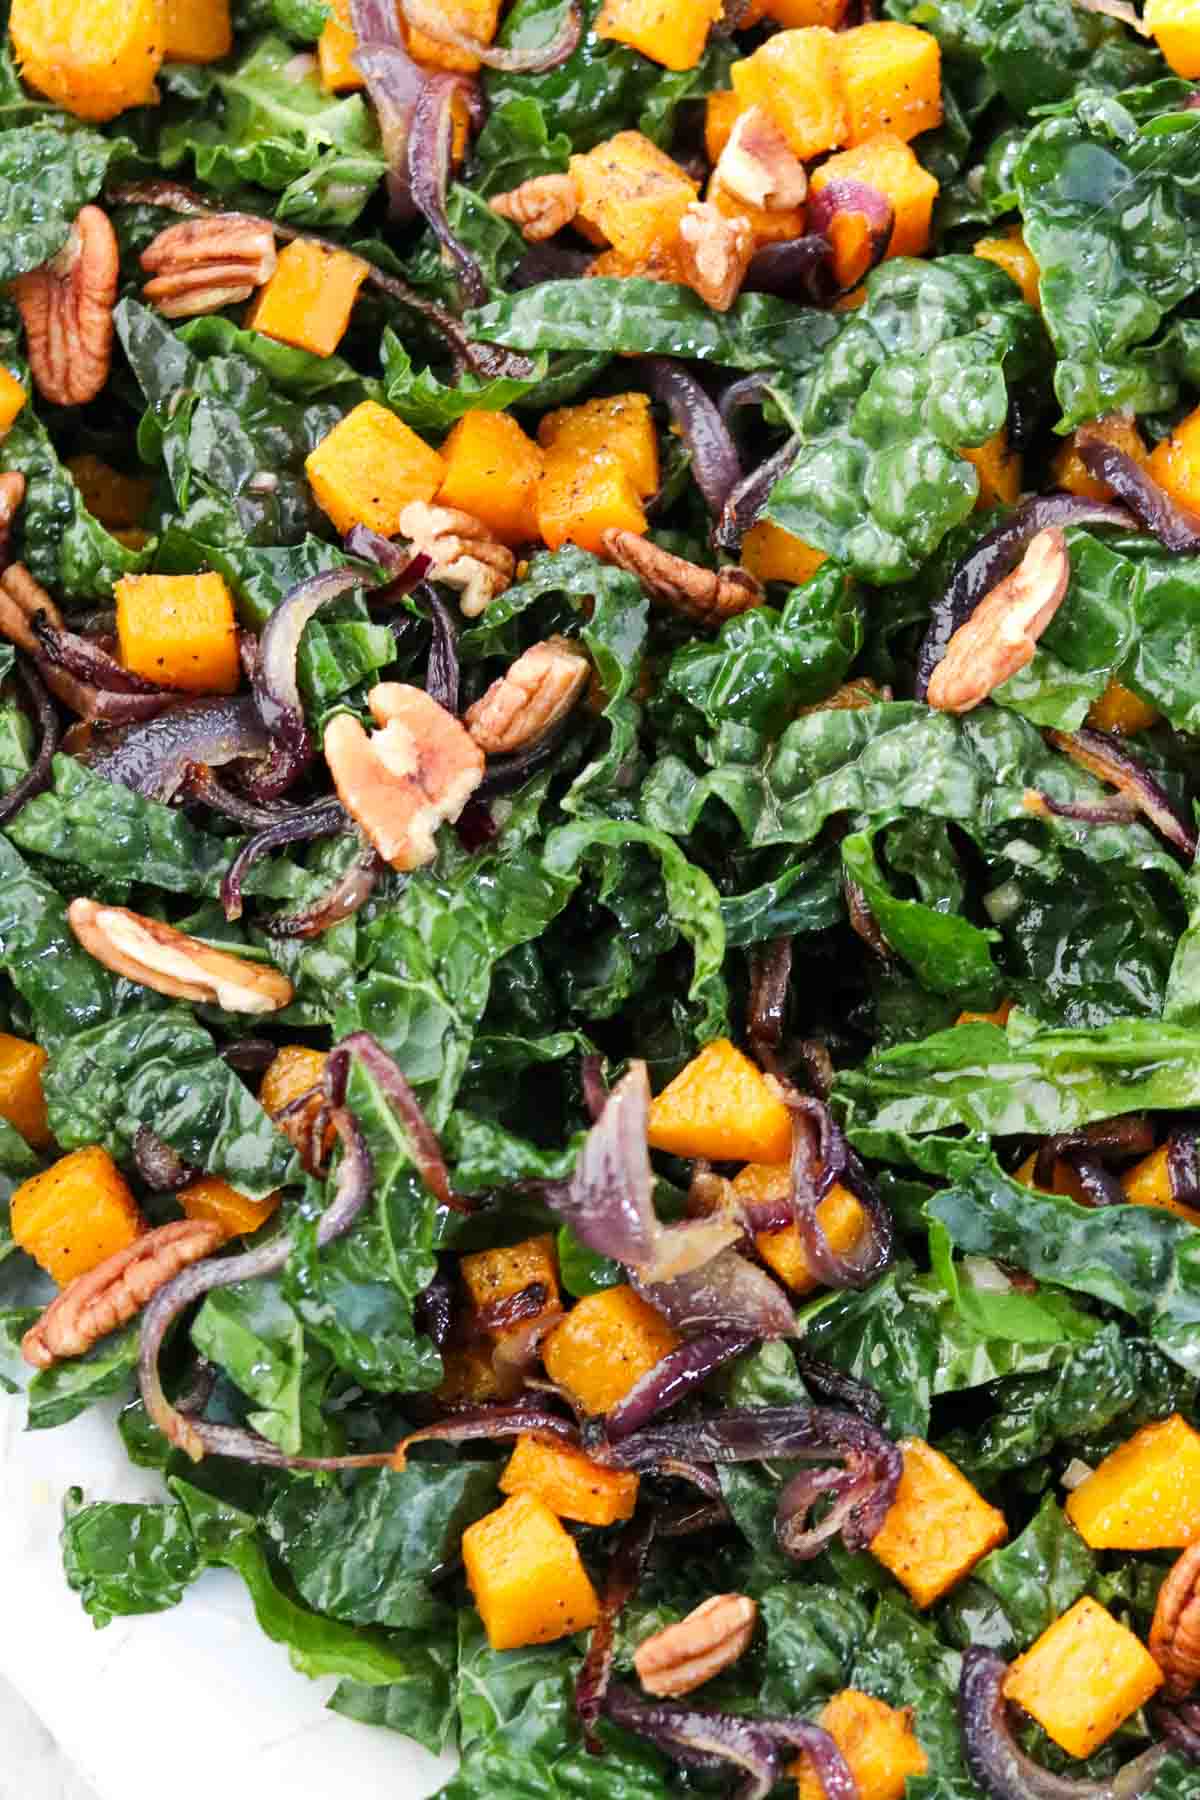 Overhead view of Kale and Butternut Squash Salad.